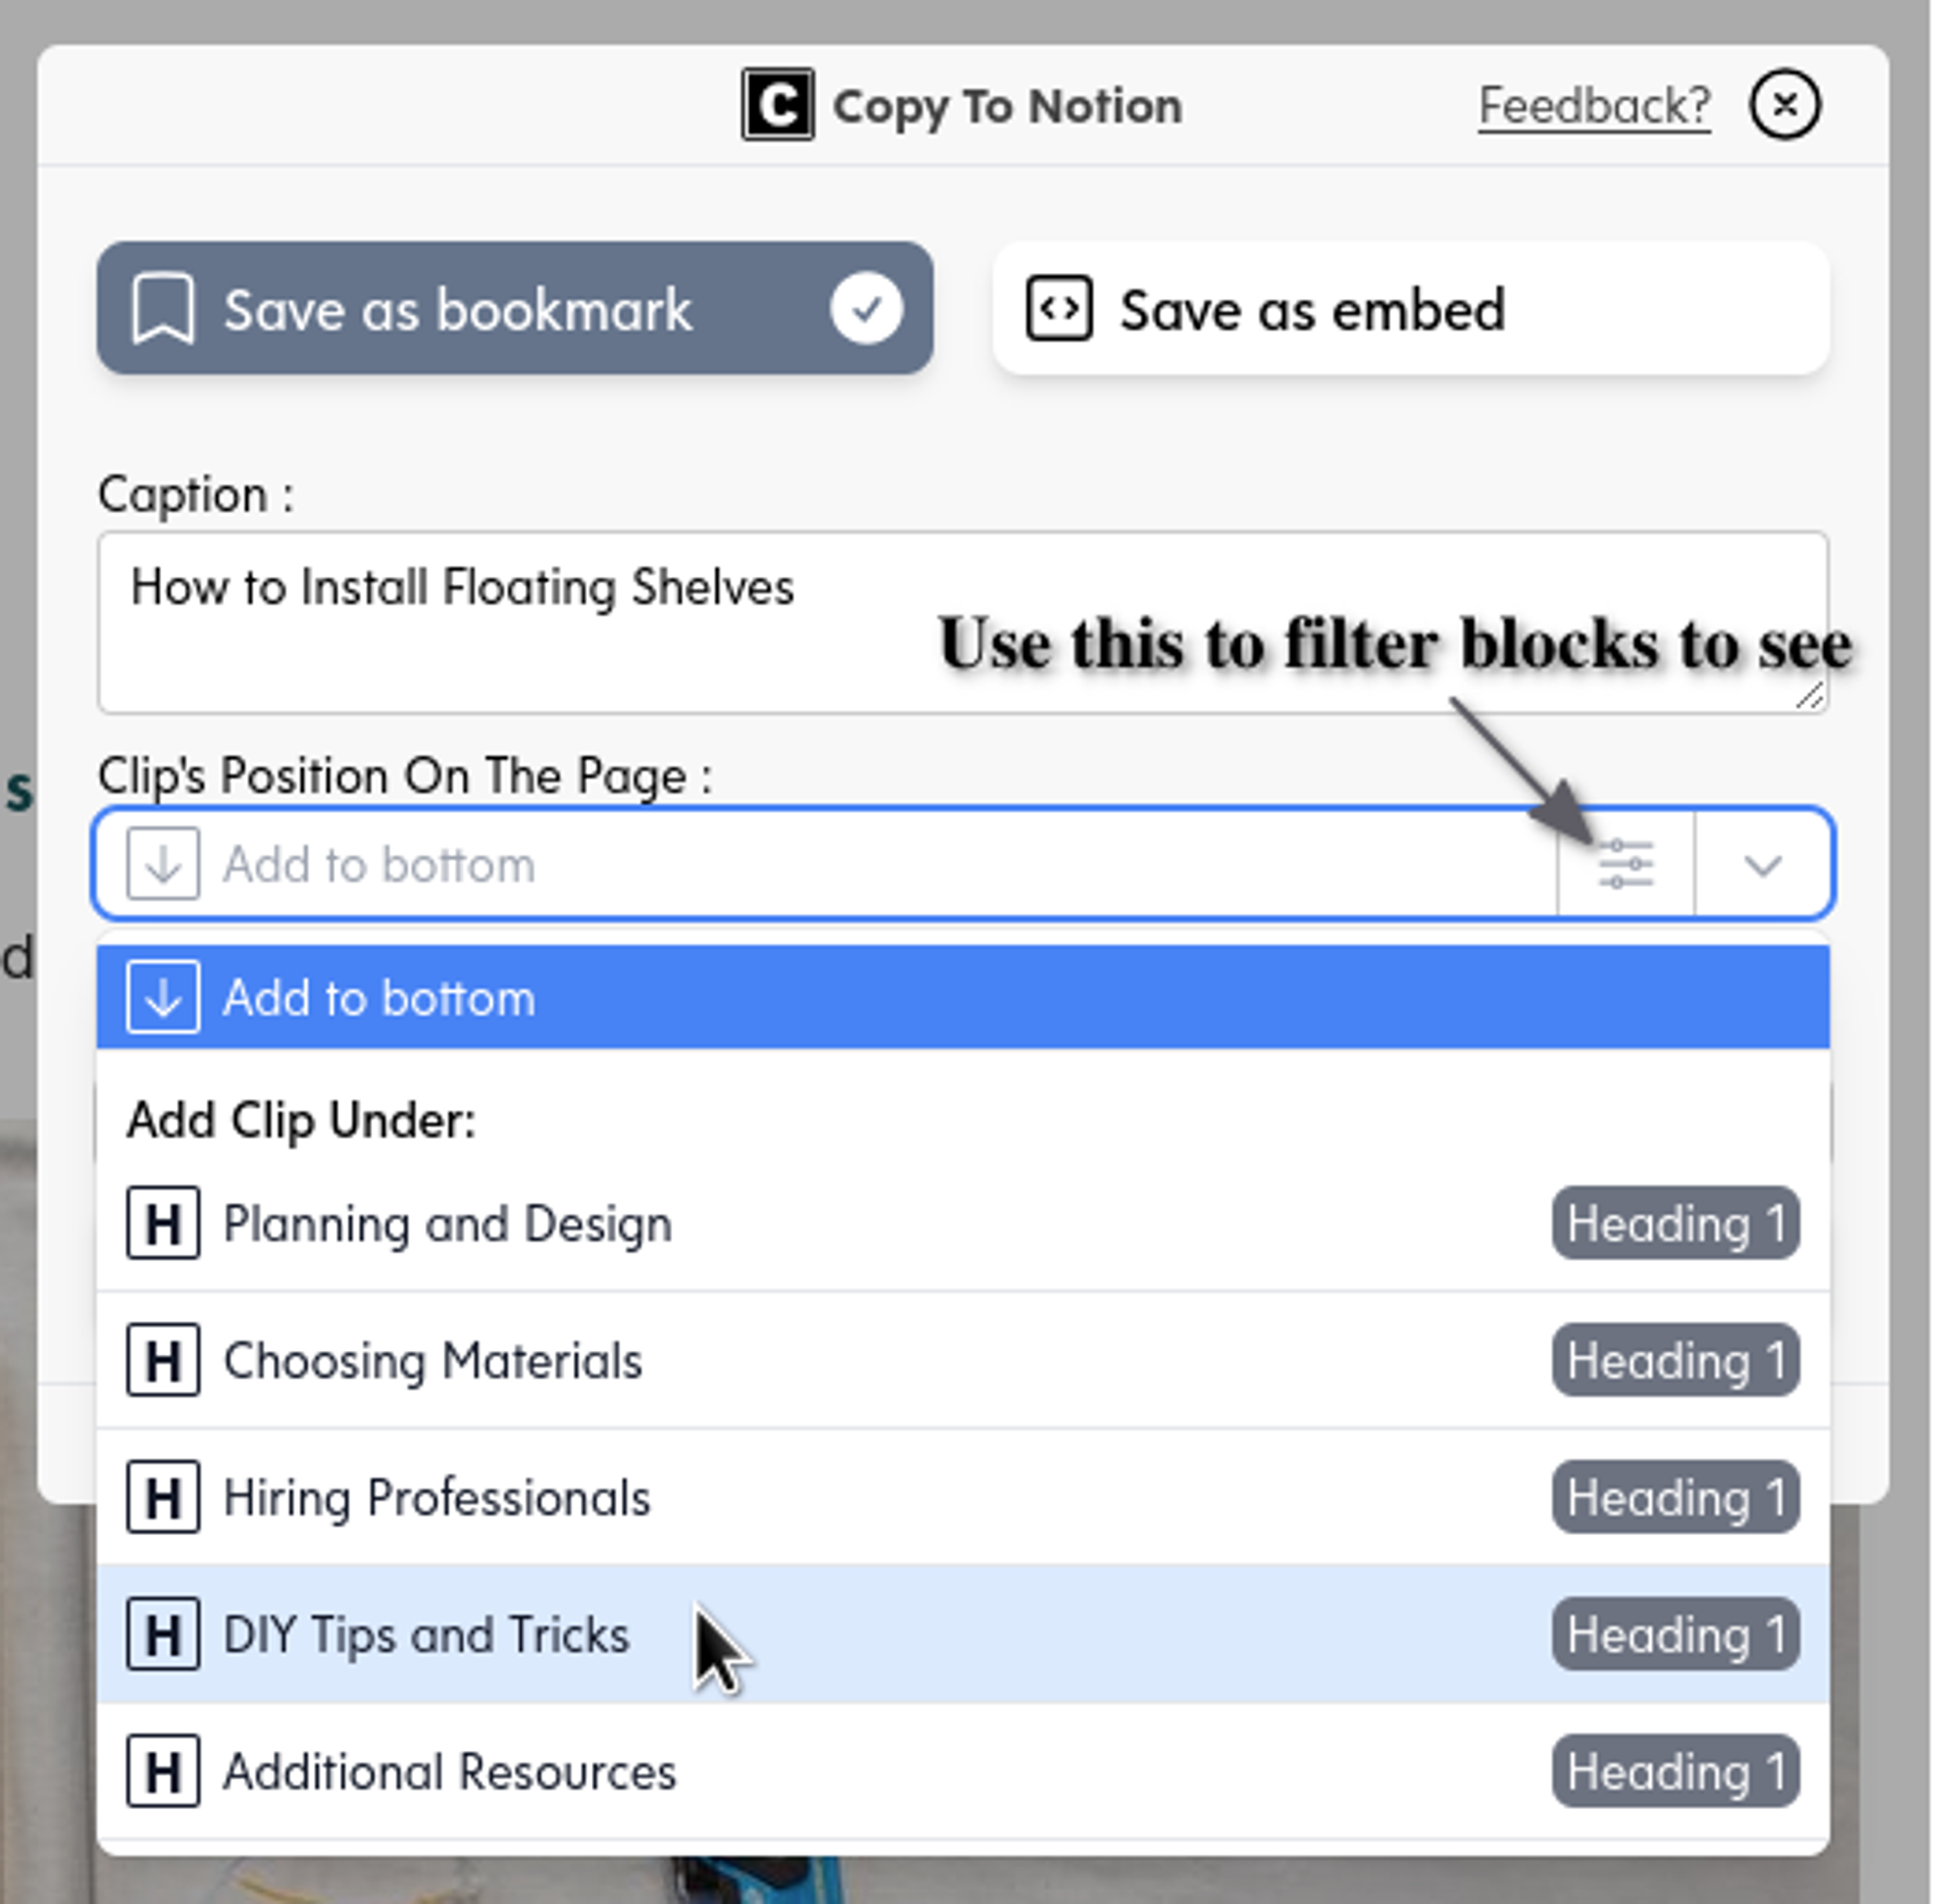 Selecting the specific block under which the bookmark will be saved